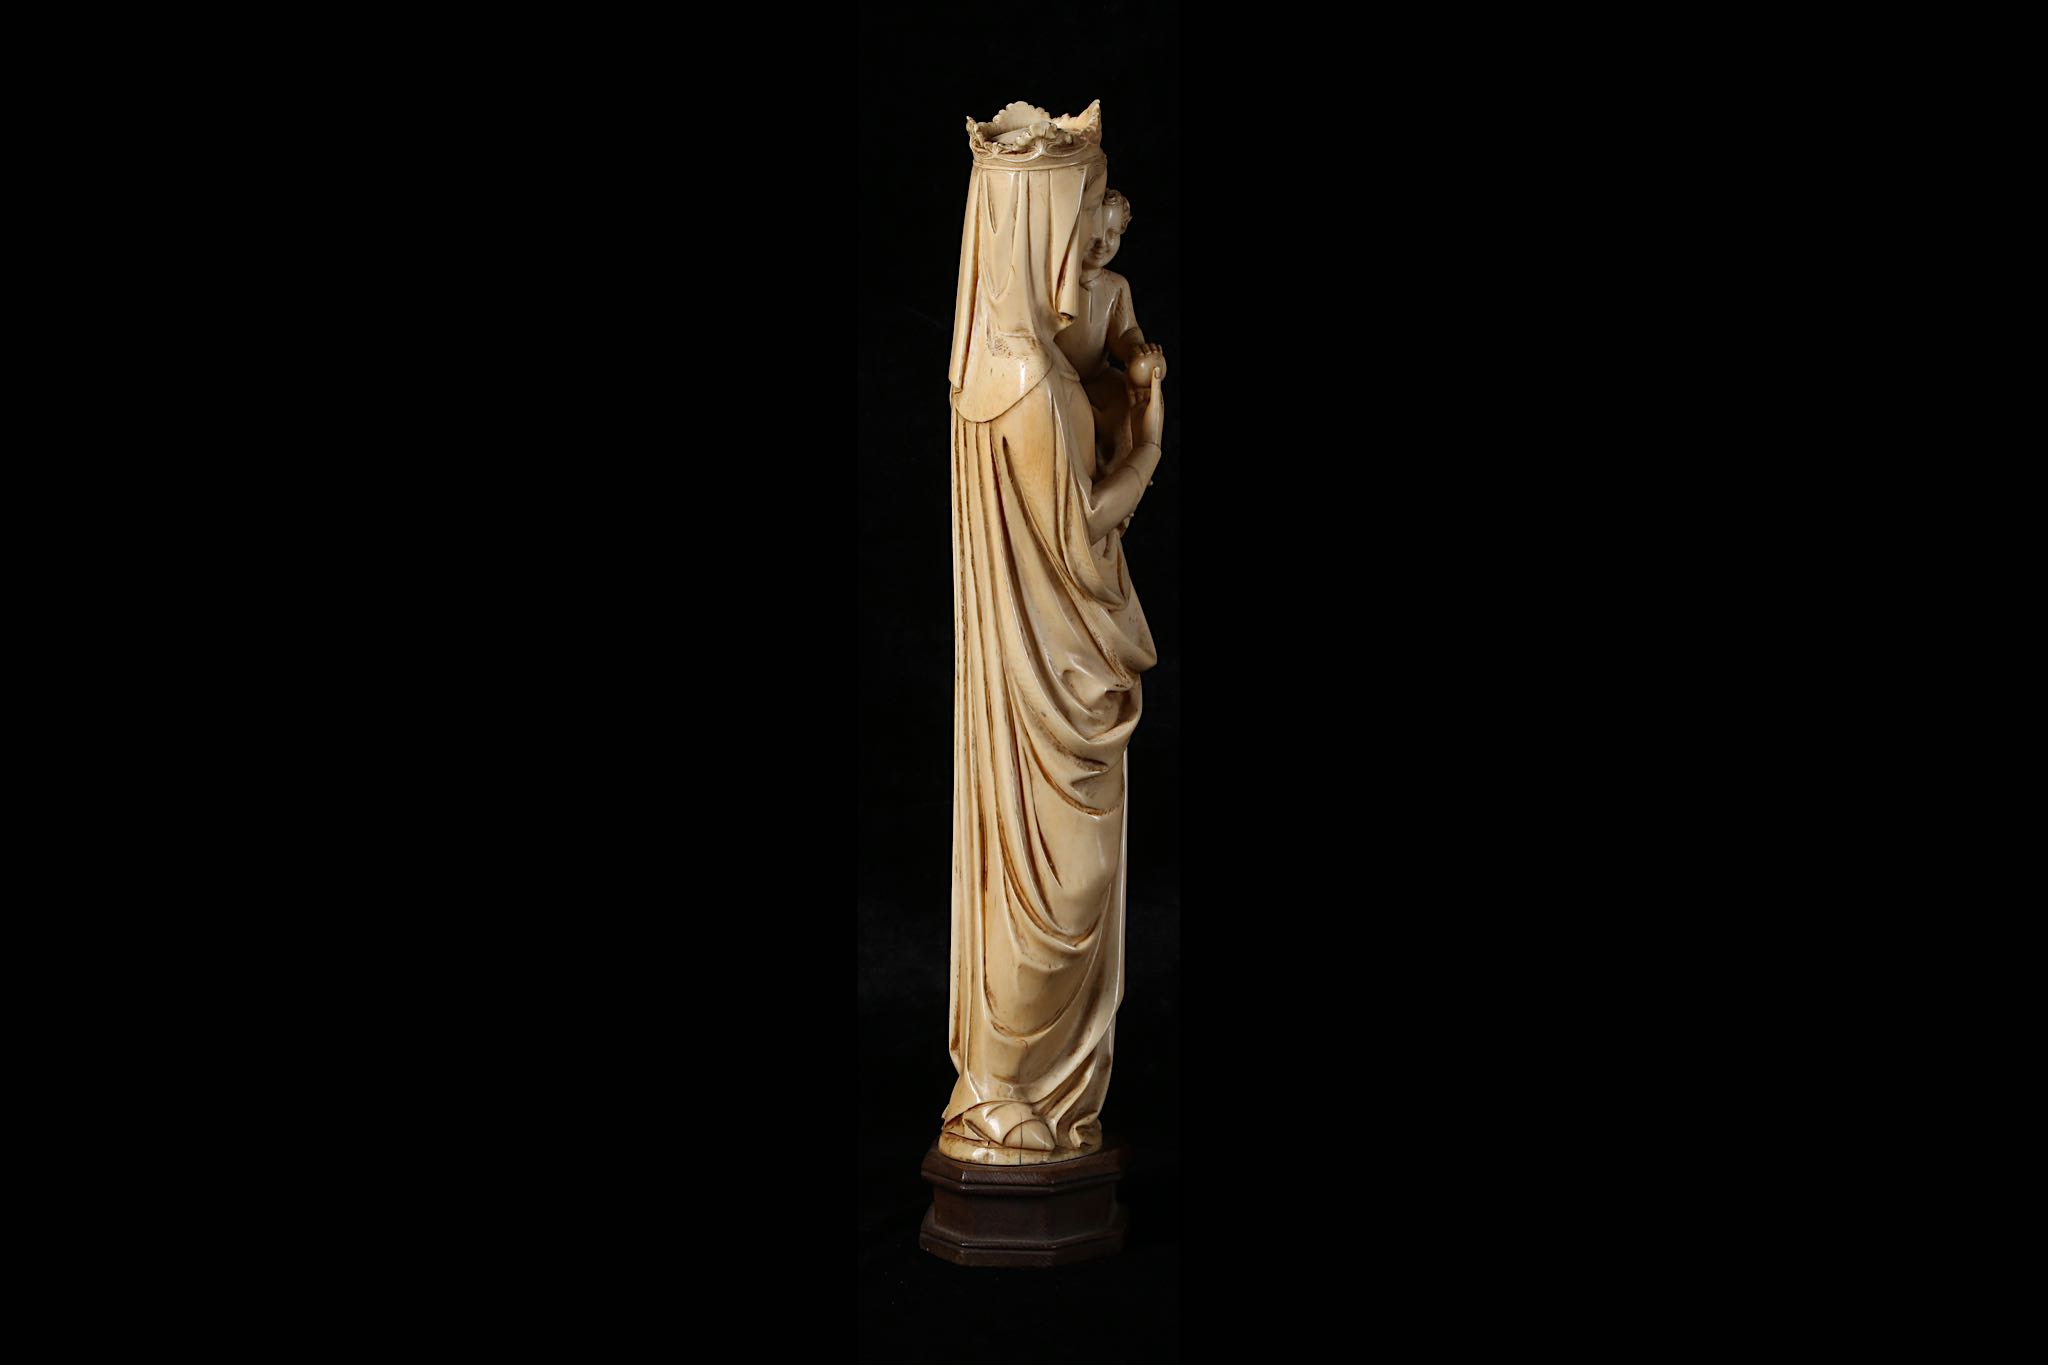 A LARGE 19TH CENTURY FRENCH (DIEPPE) CARVED IVORY FIGURE OF THE VIRGIN AND CHILD IN THE GOTHIC STYLE - Image 4 of 5